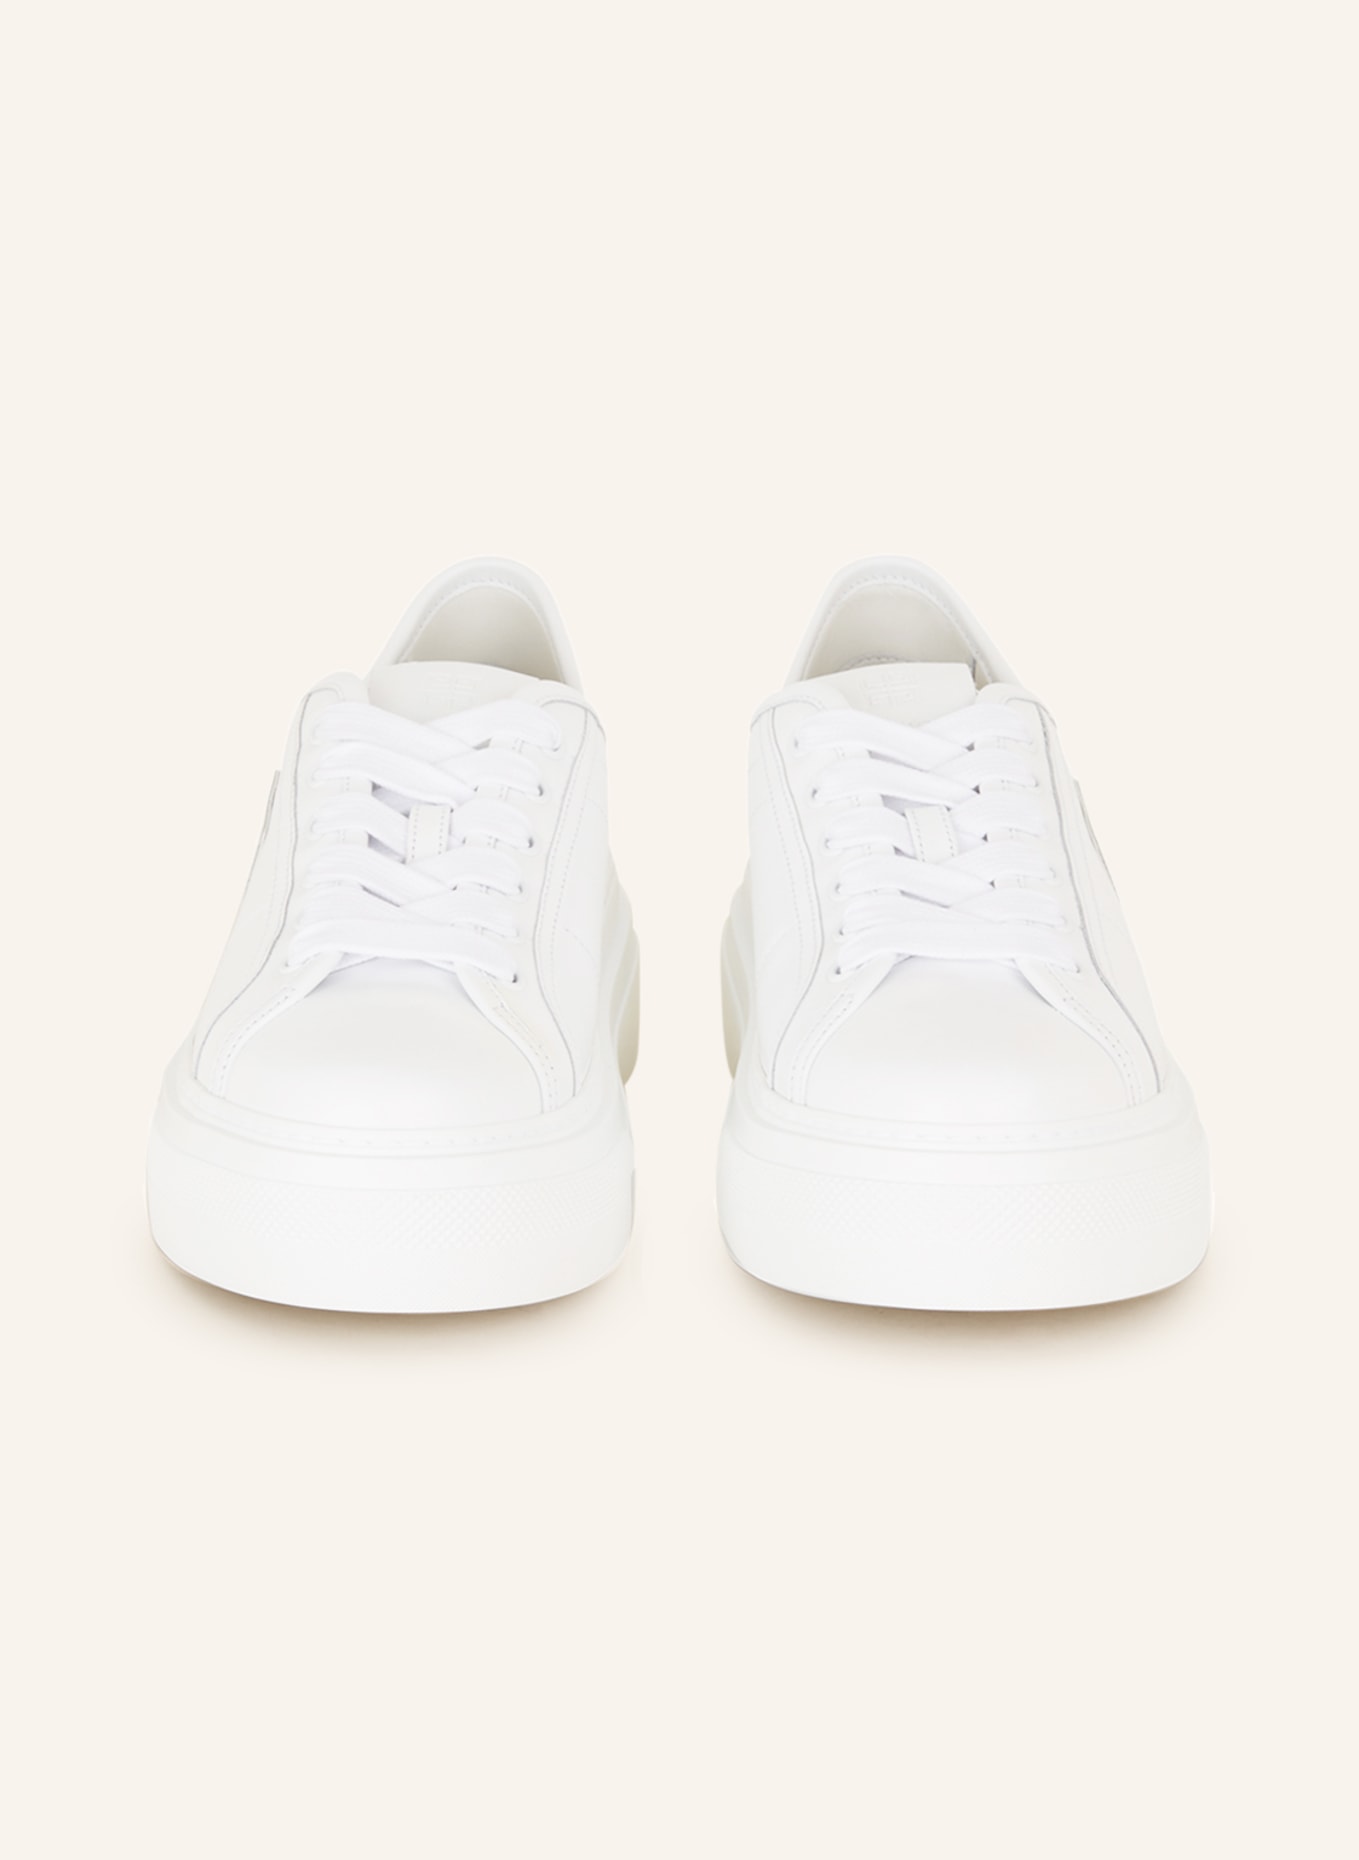 GIVENCHY Sneaker CITY, Farbe: WEISS (Bild 3)